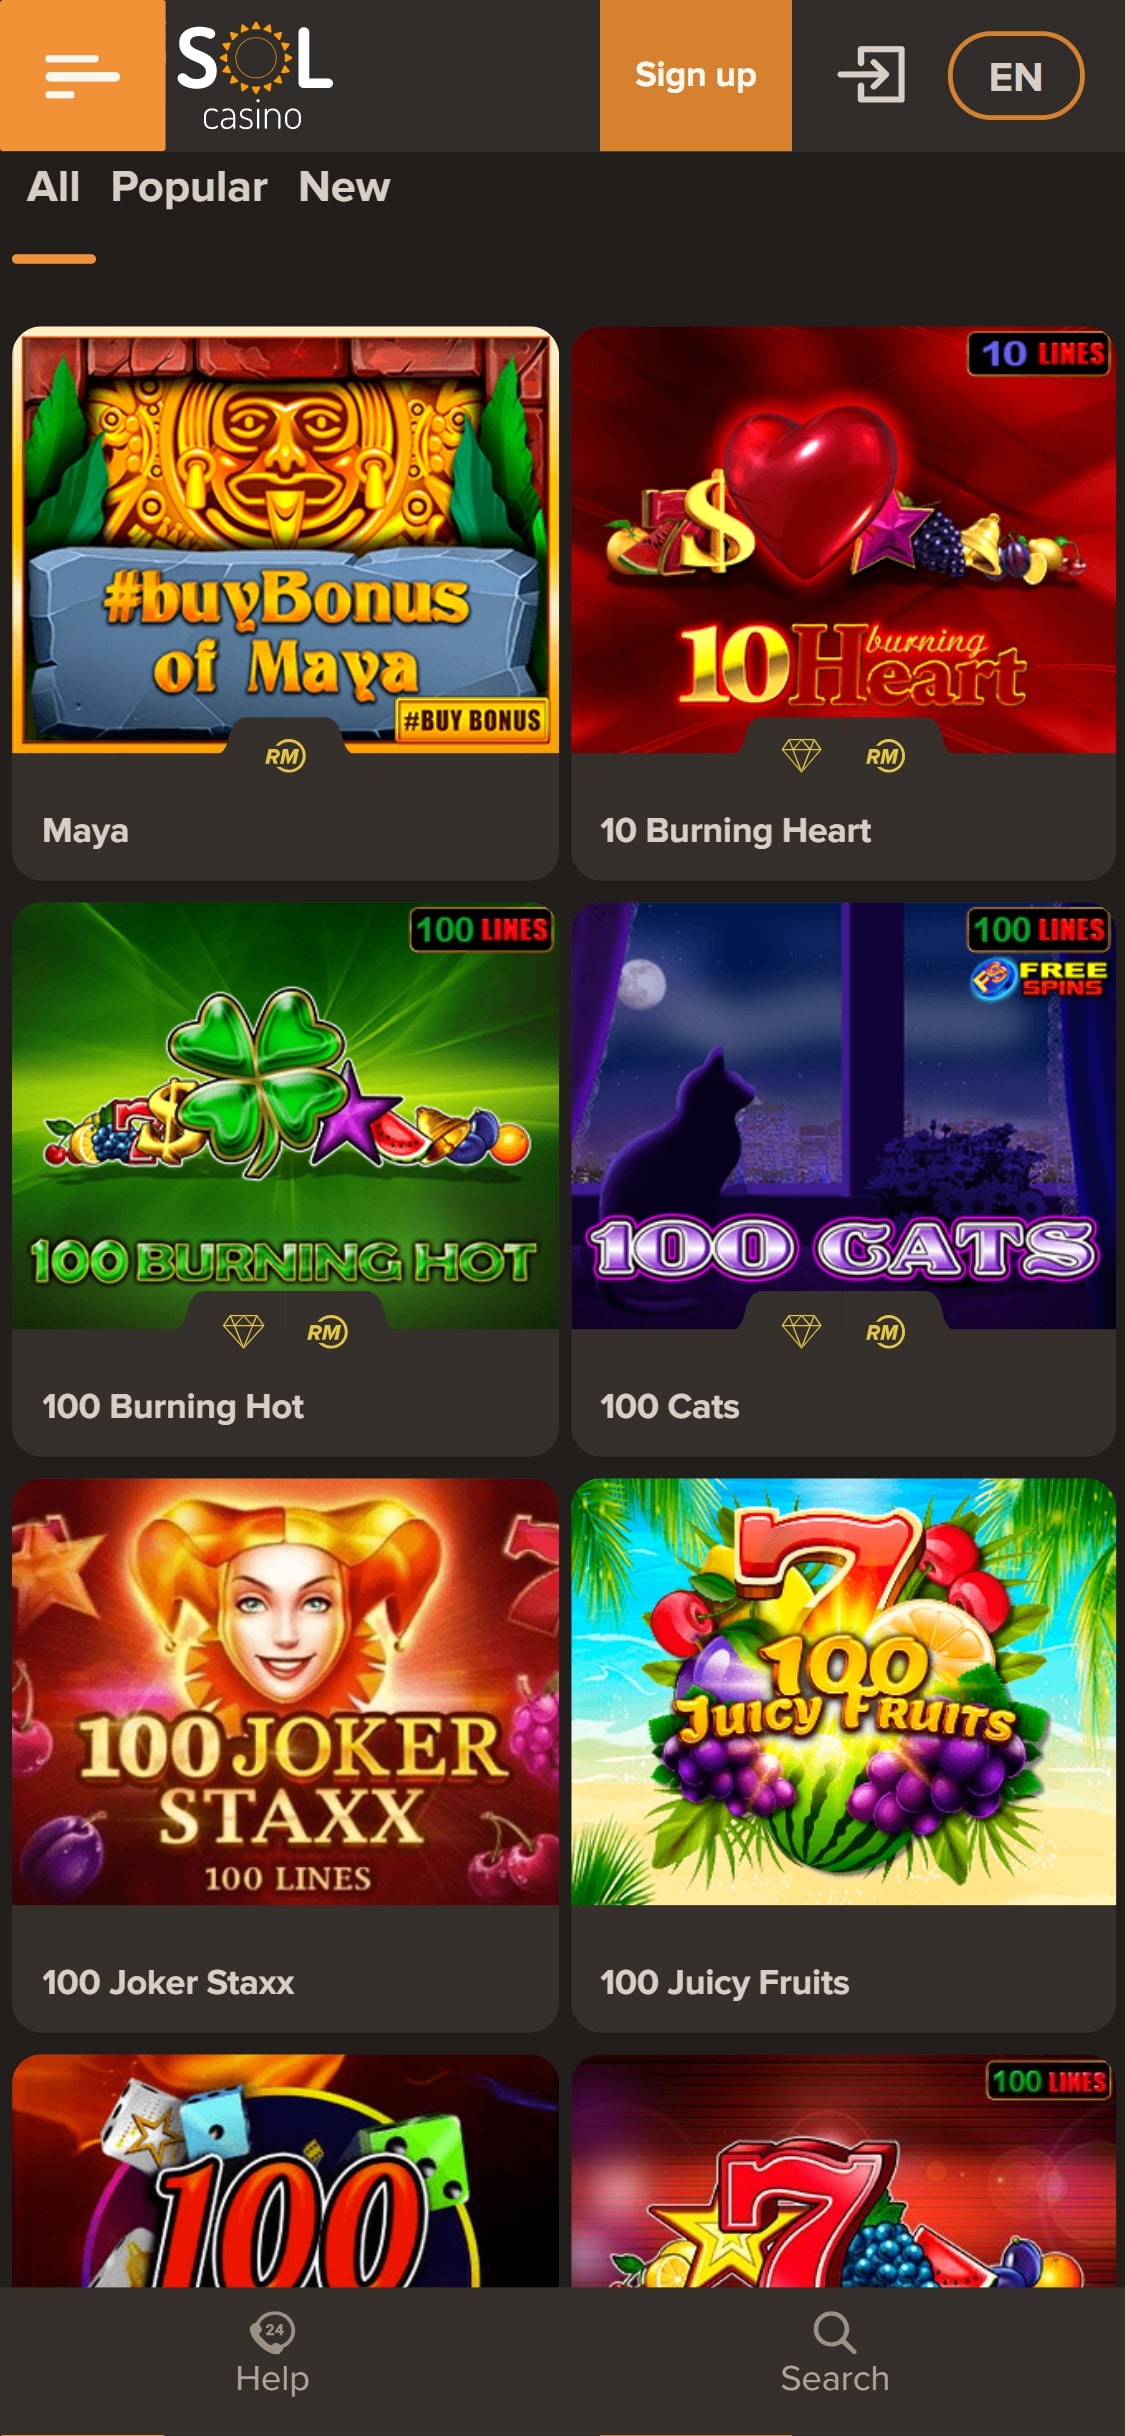 SOL Casino Mobile Games Review